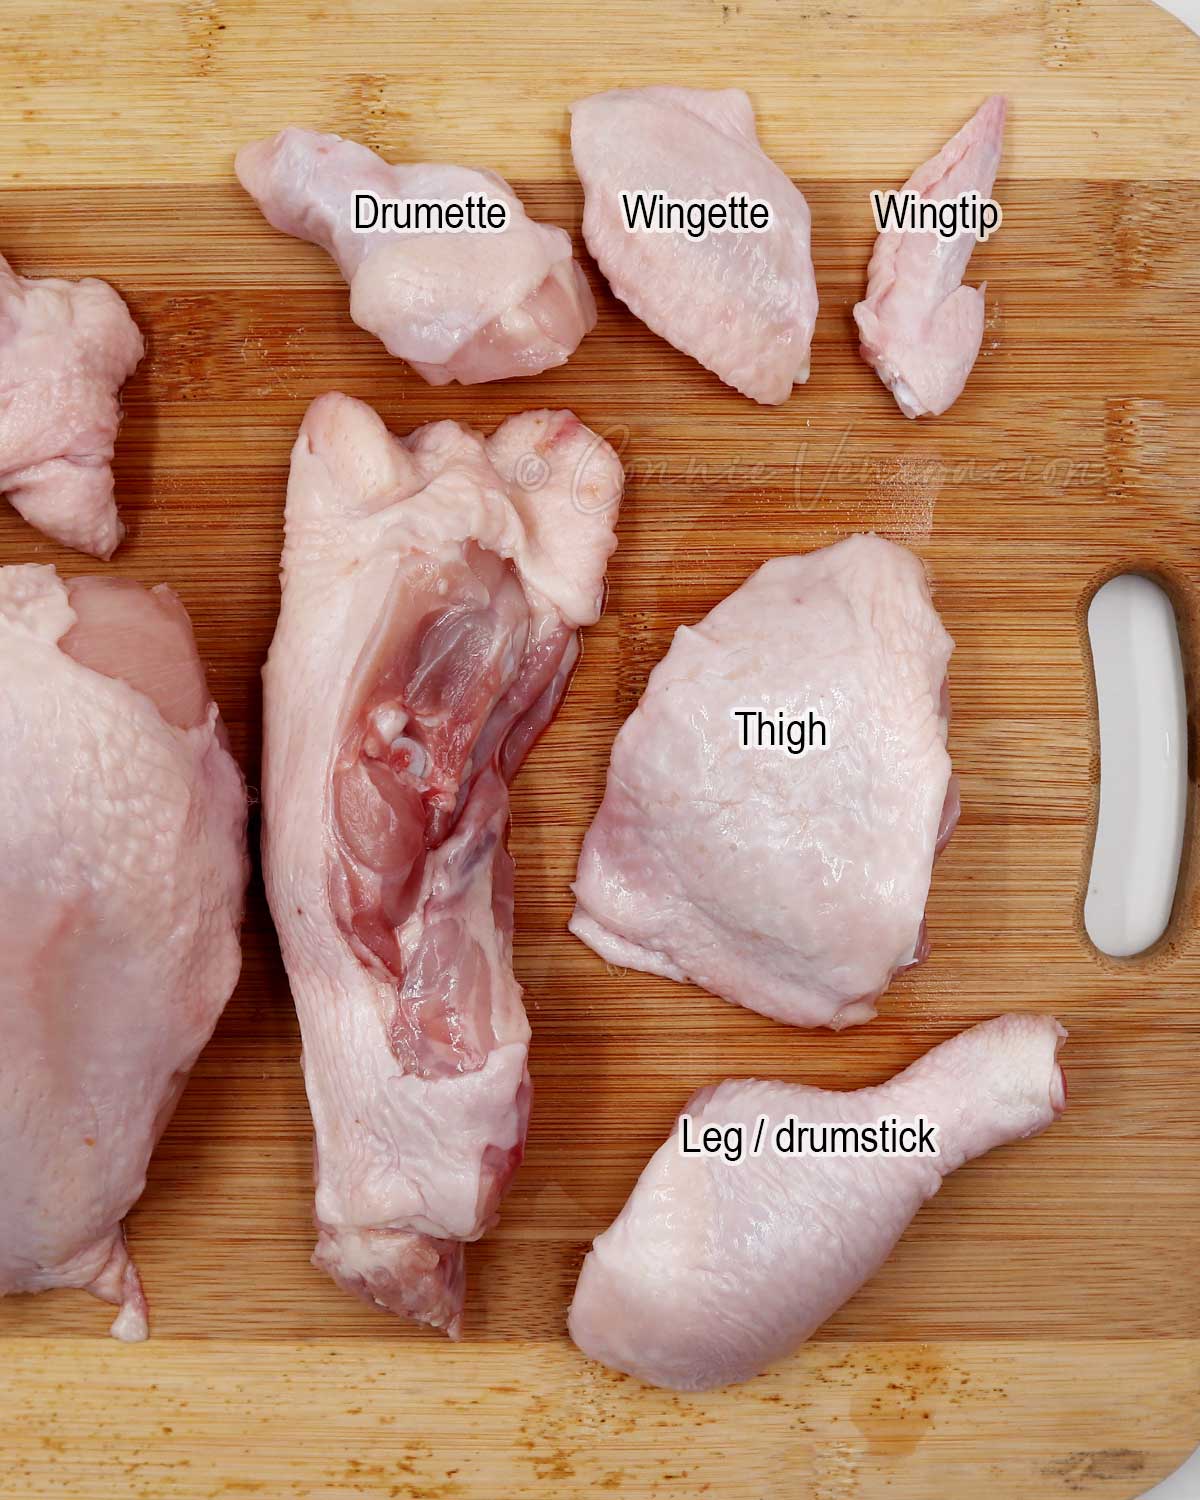 Parts of a chicken wing and leg